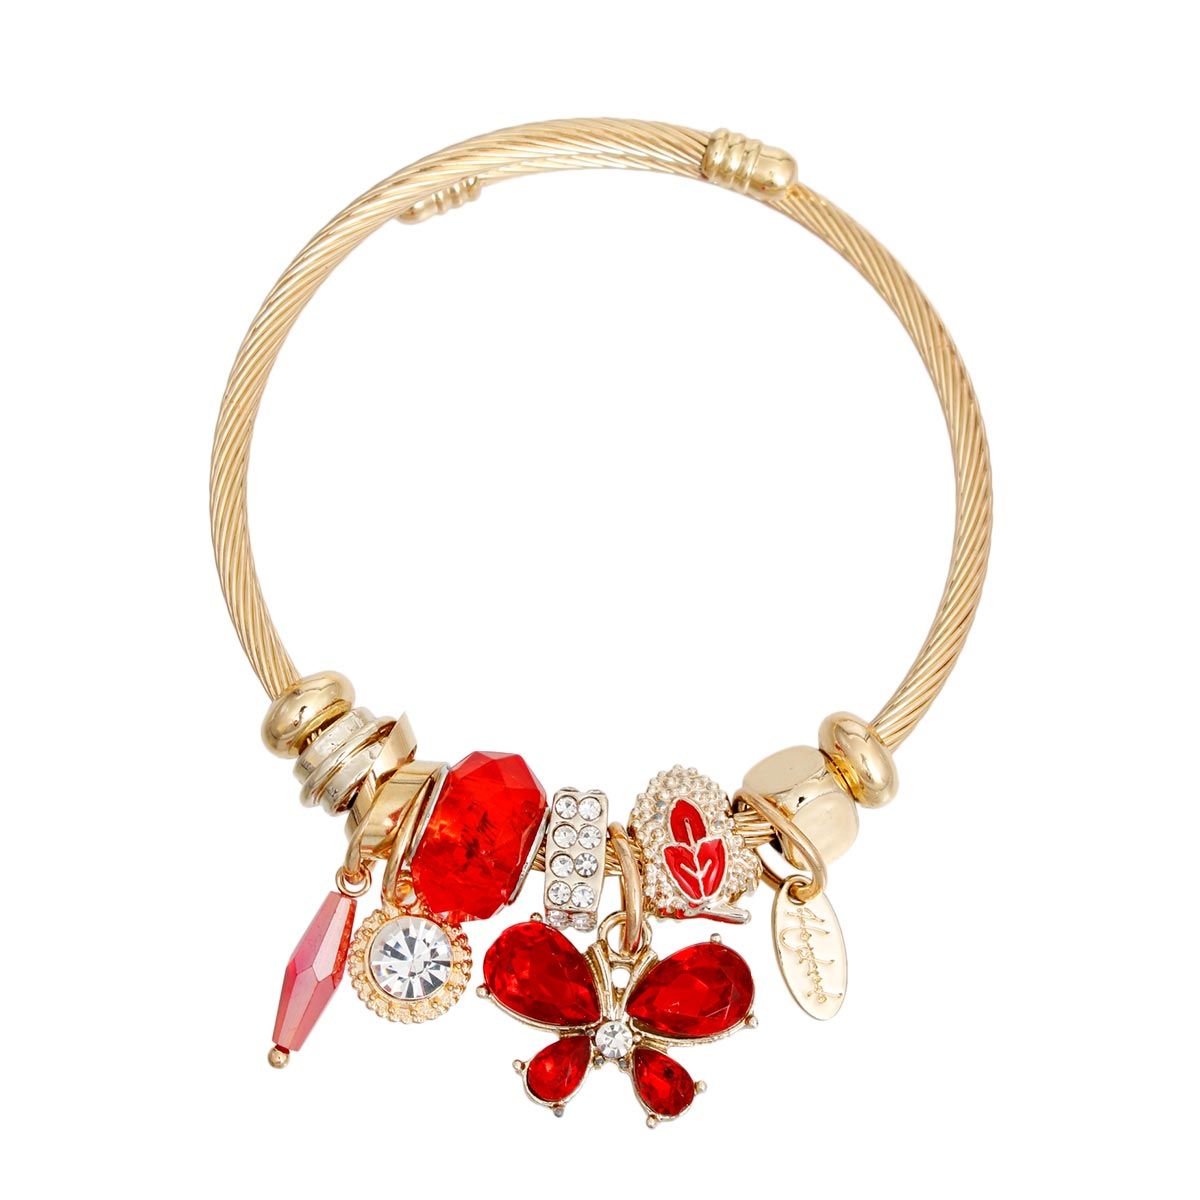 Cable Bangle Red Butterfly Gold Bracelet Women